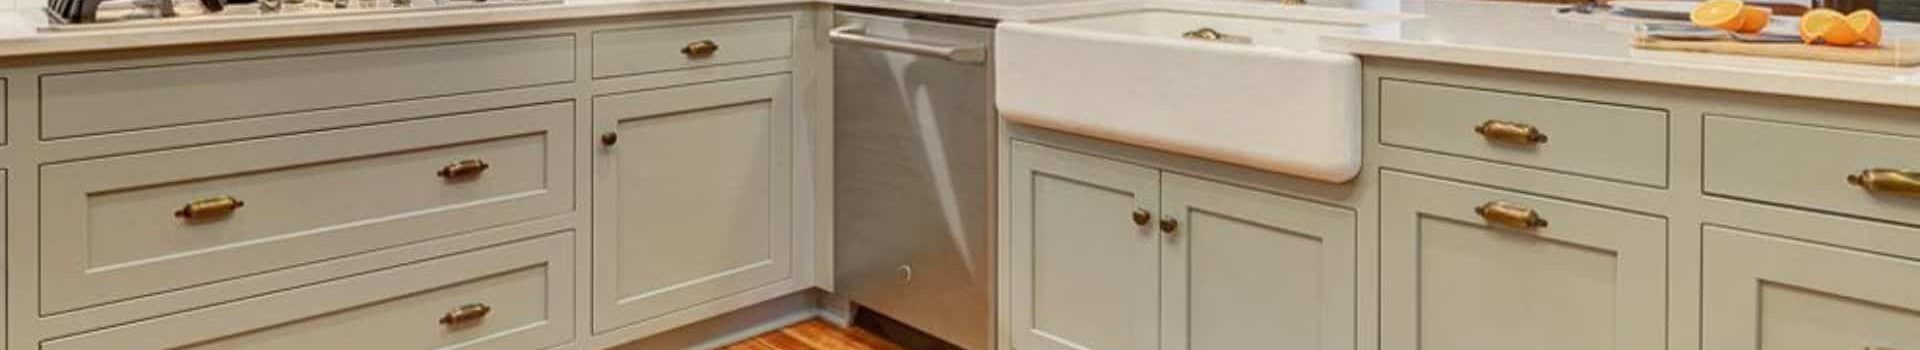 photo of sage green painted cabinets